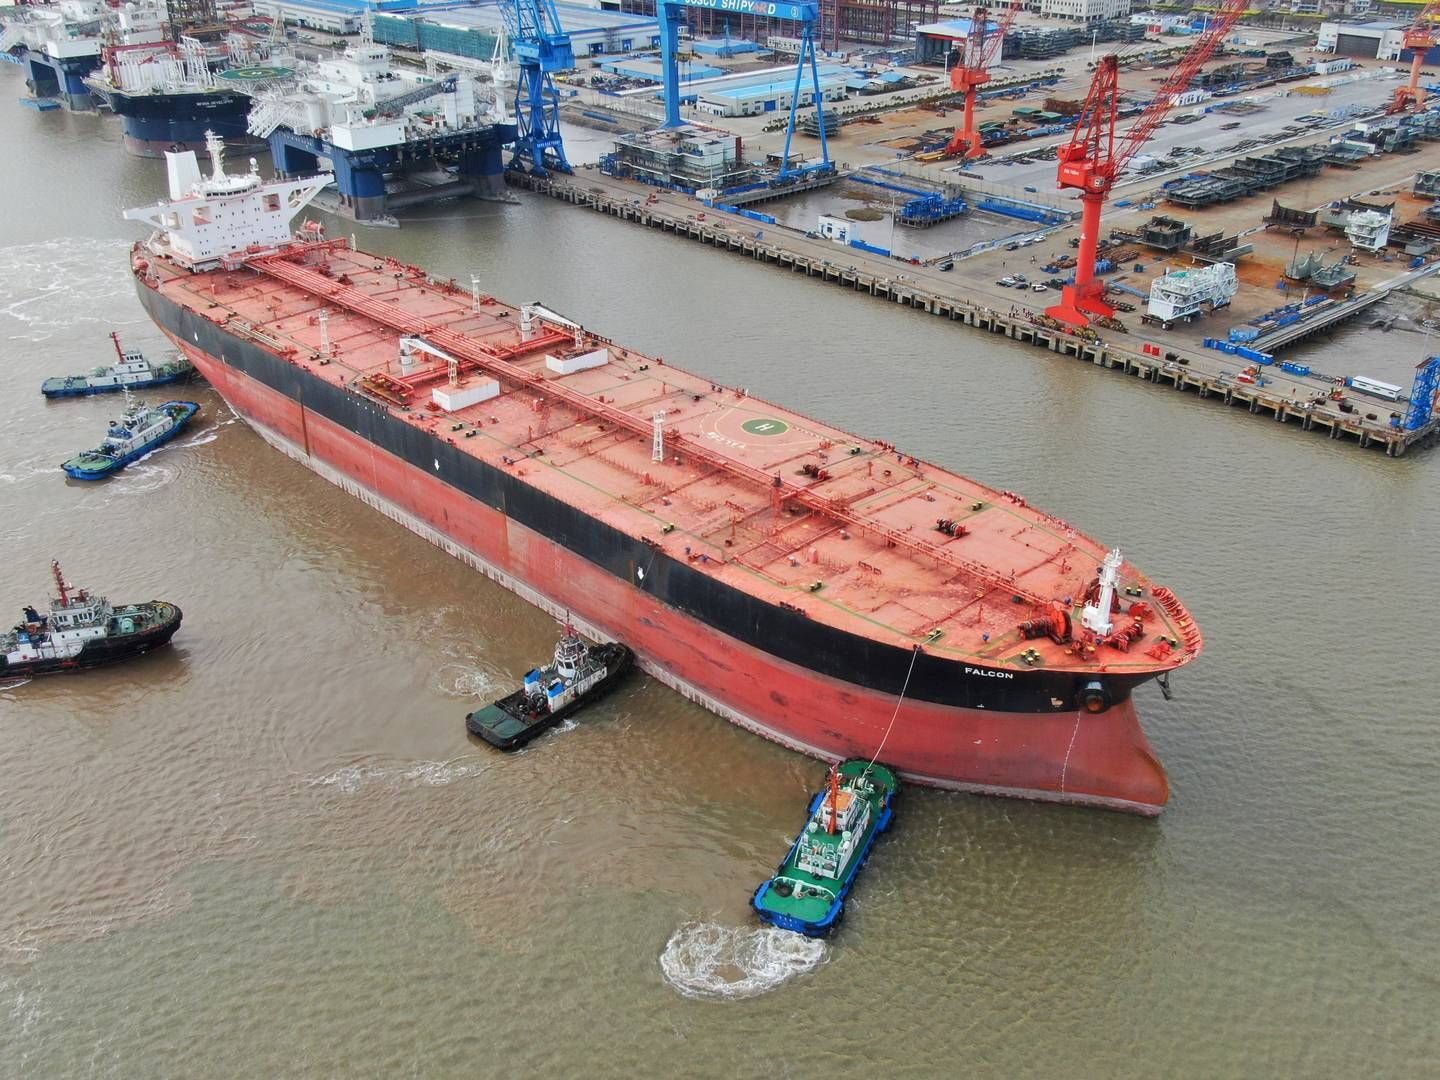 Major VLCC owners have decided that the oil market needs more than a handful of VLCC deliveries each year, according to brokerage Poten and Partners, which expects the order book to more than double by 2024.